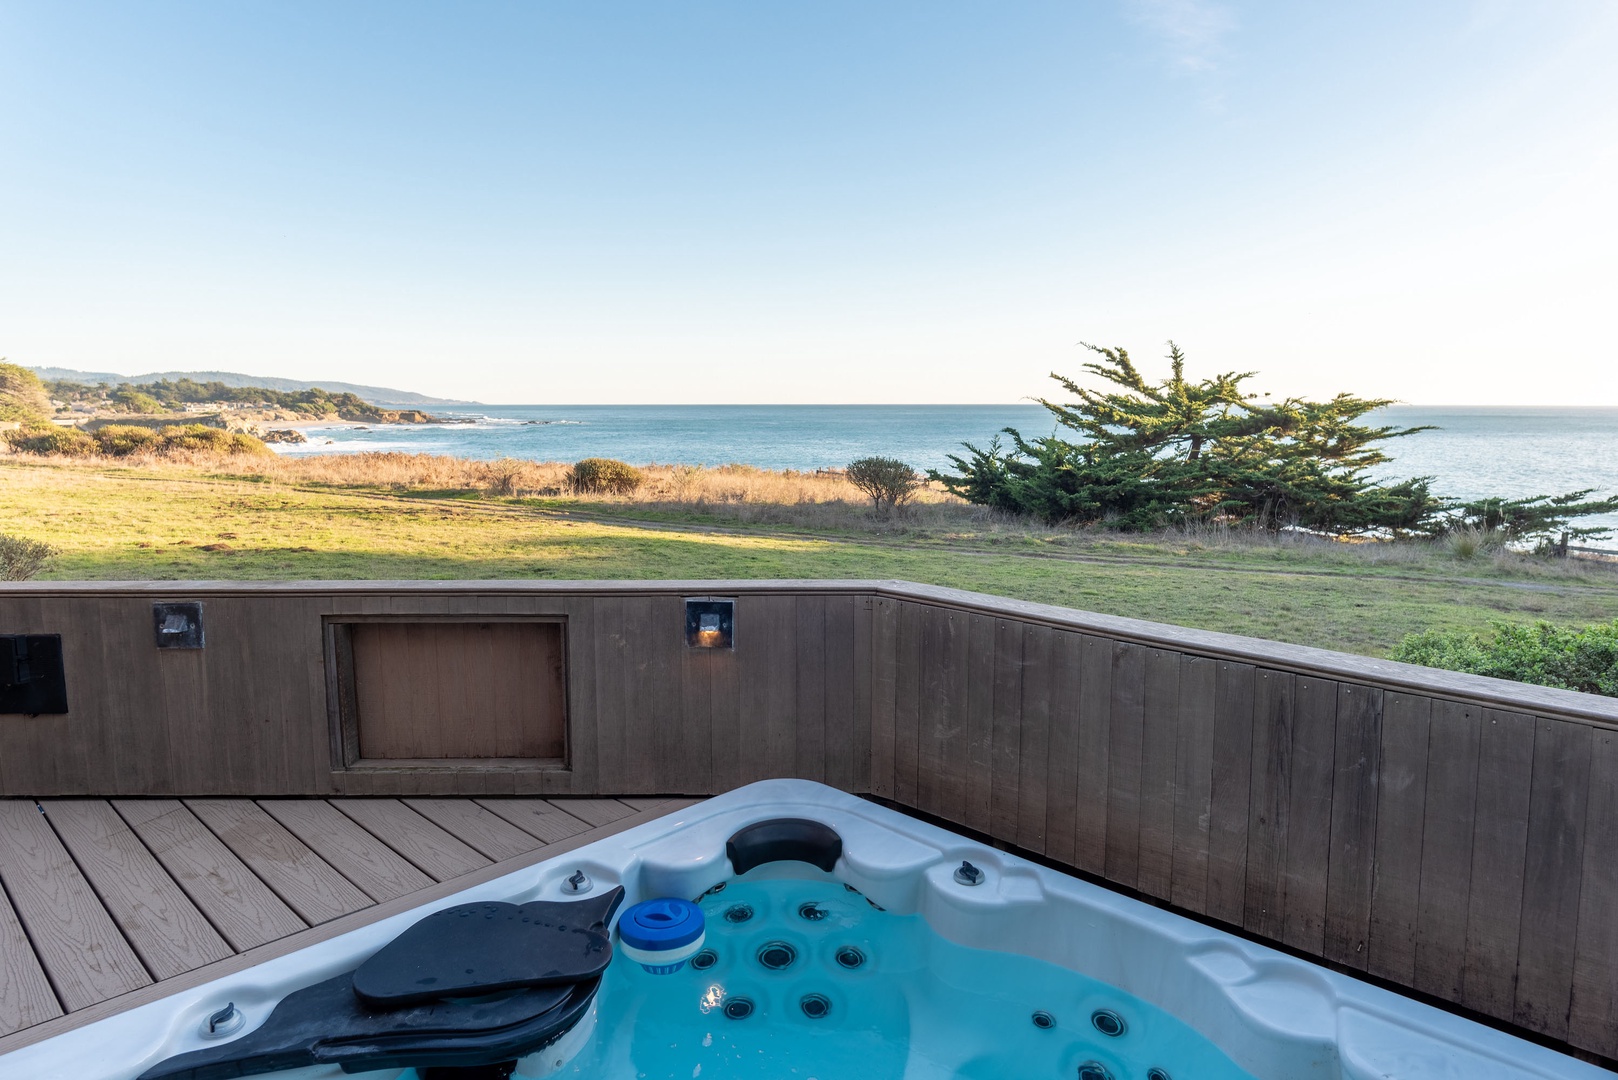 Private outdoor hot tub on deck with ocean views